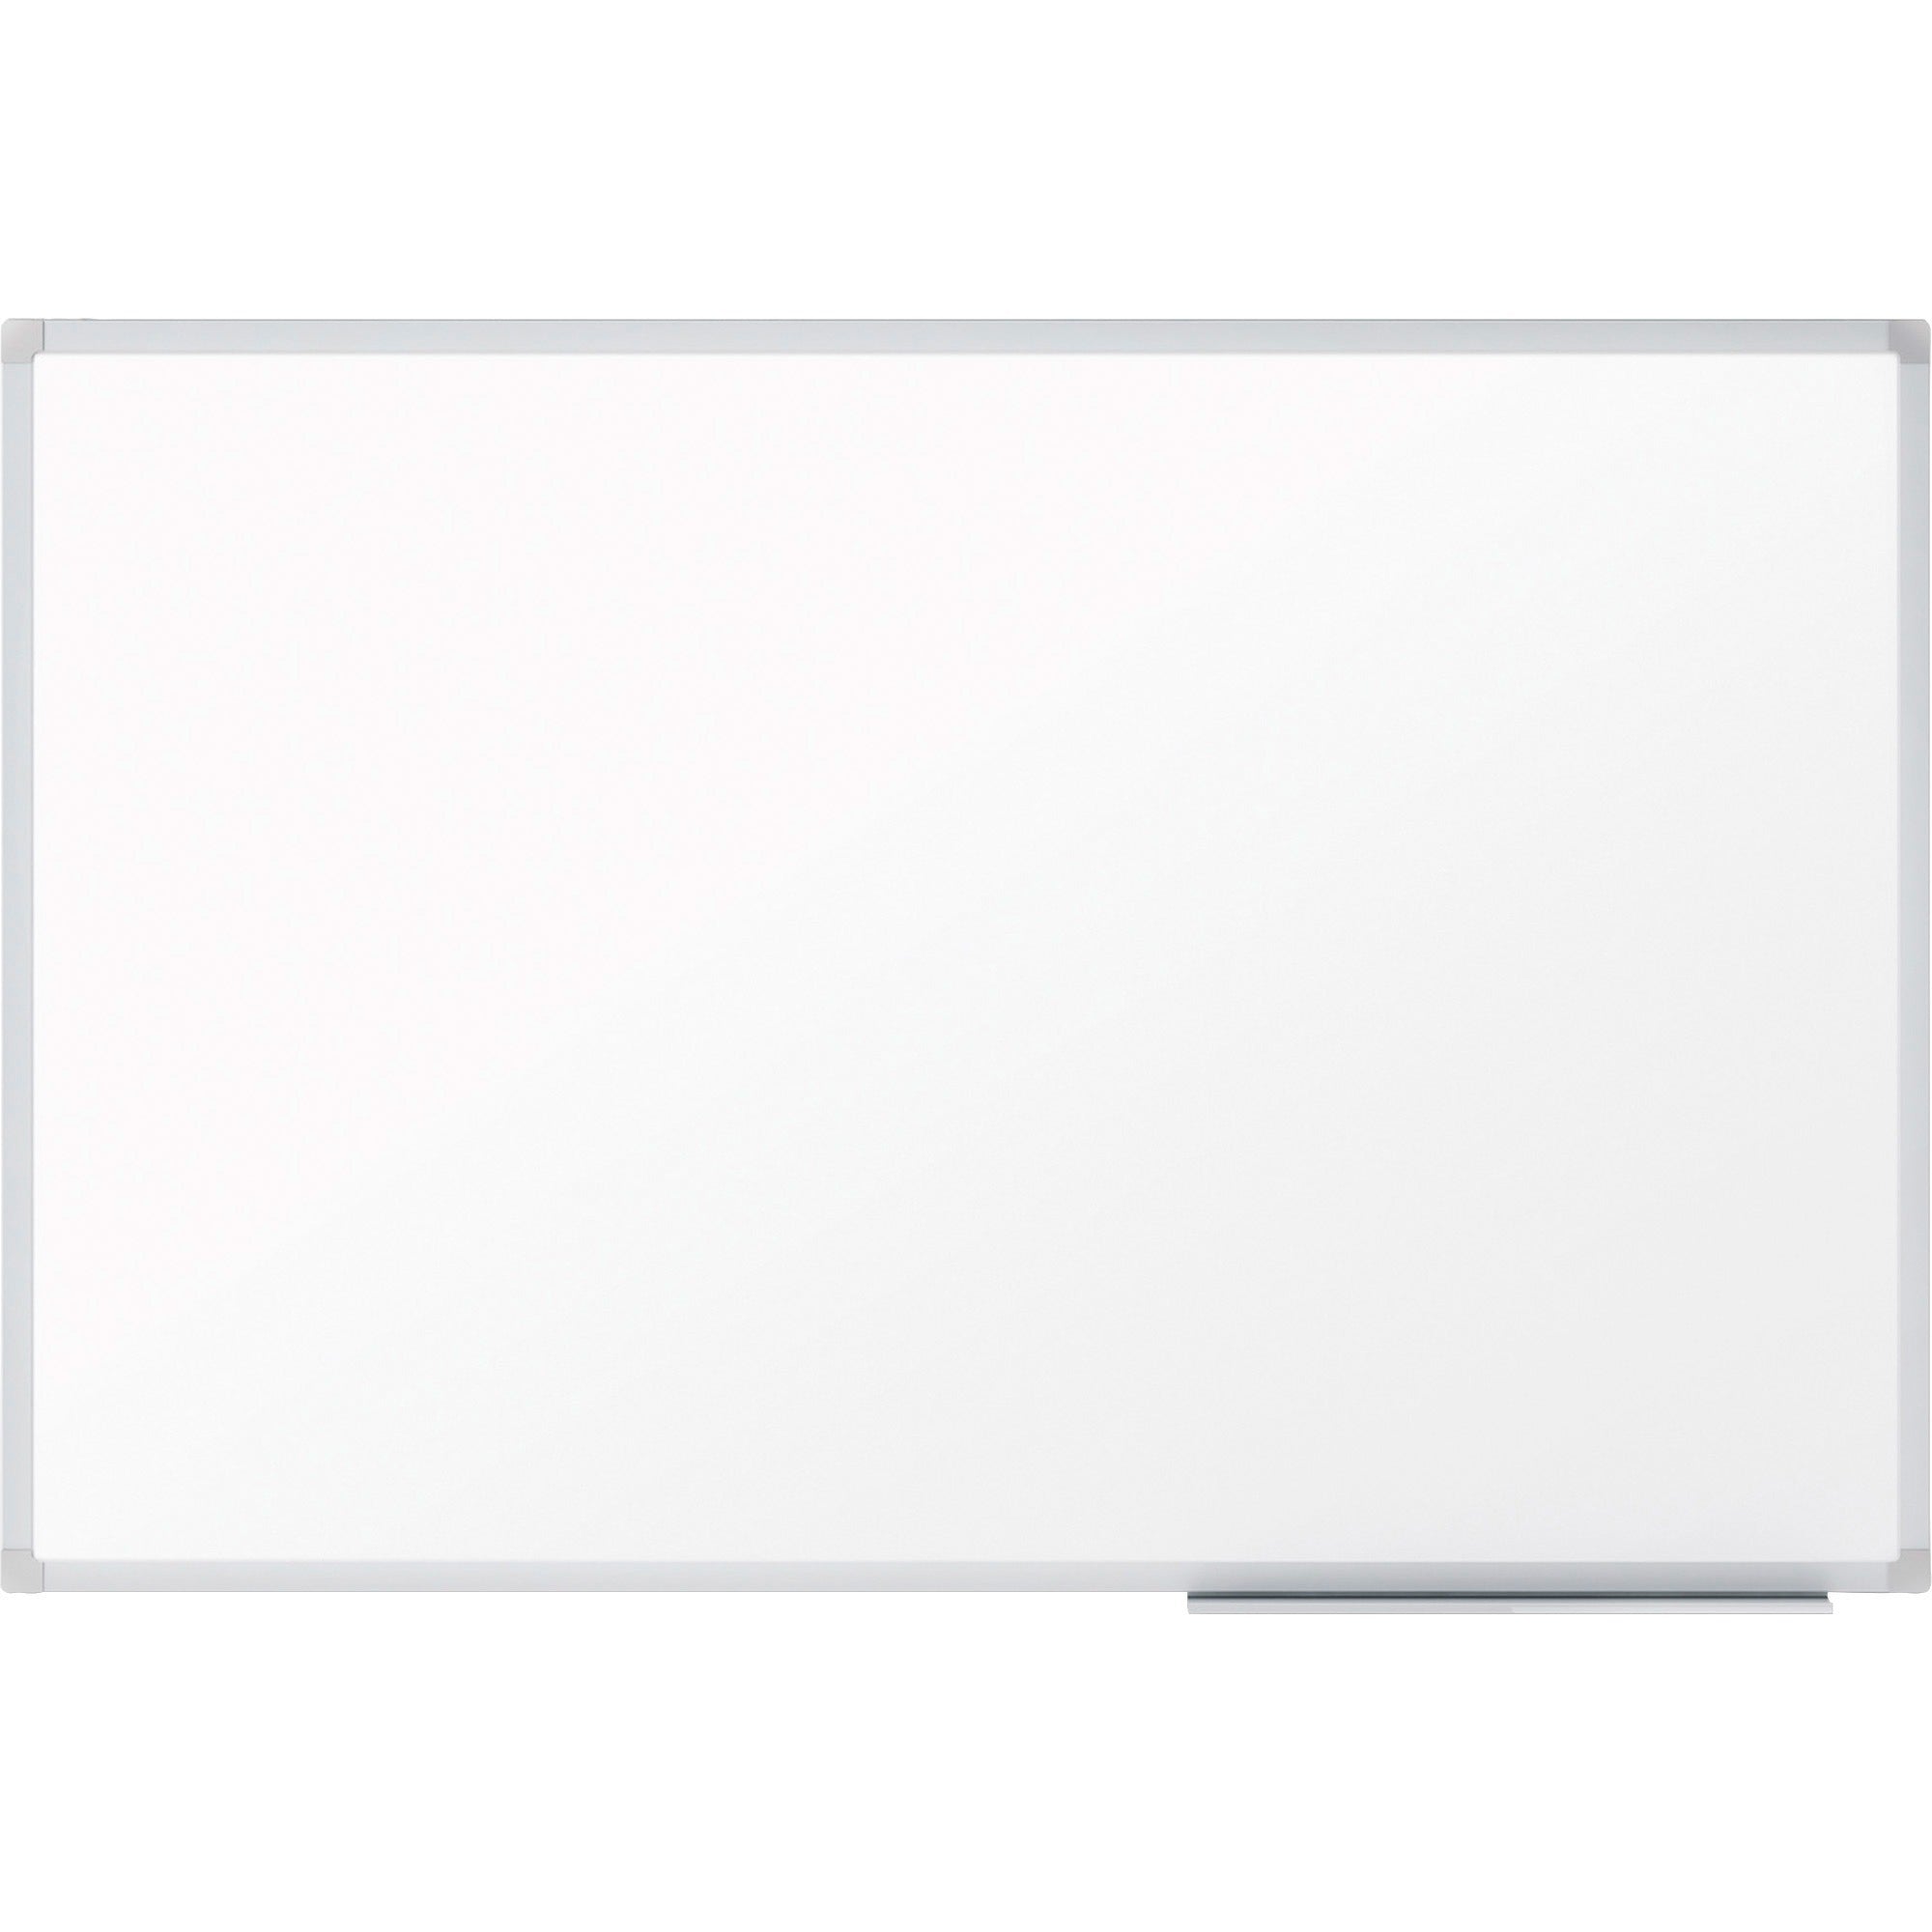 Mead Basic Dry-Erase Board - 96.6" (8.1 ft) Width x 48.6" (4.1 ft) Height - White Melamine Surface - Silver Aluminum Frame - Durable, Marker Tray - 1 Each - 1